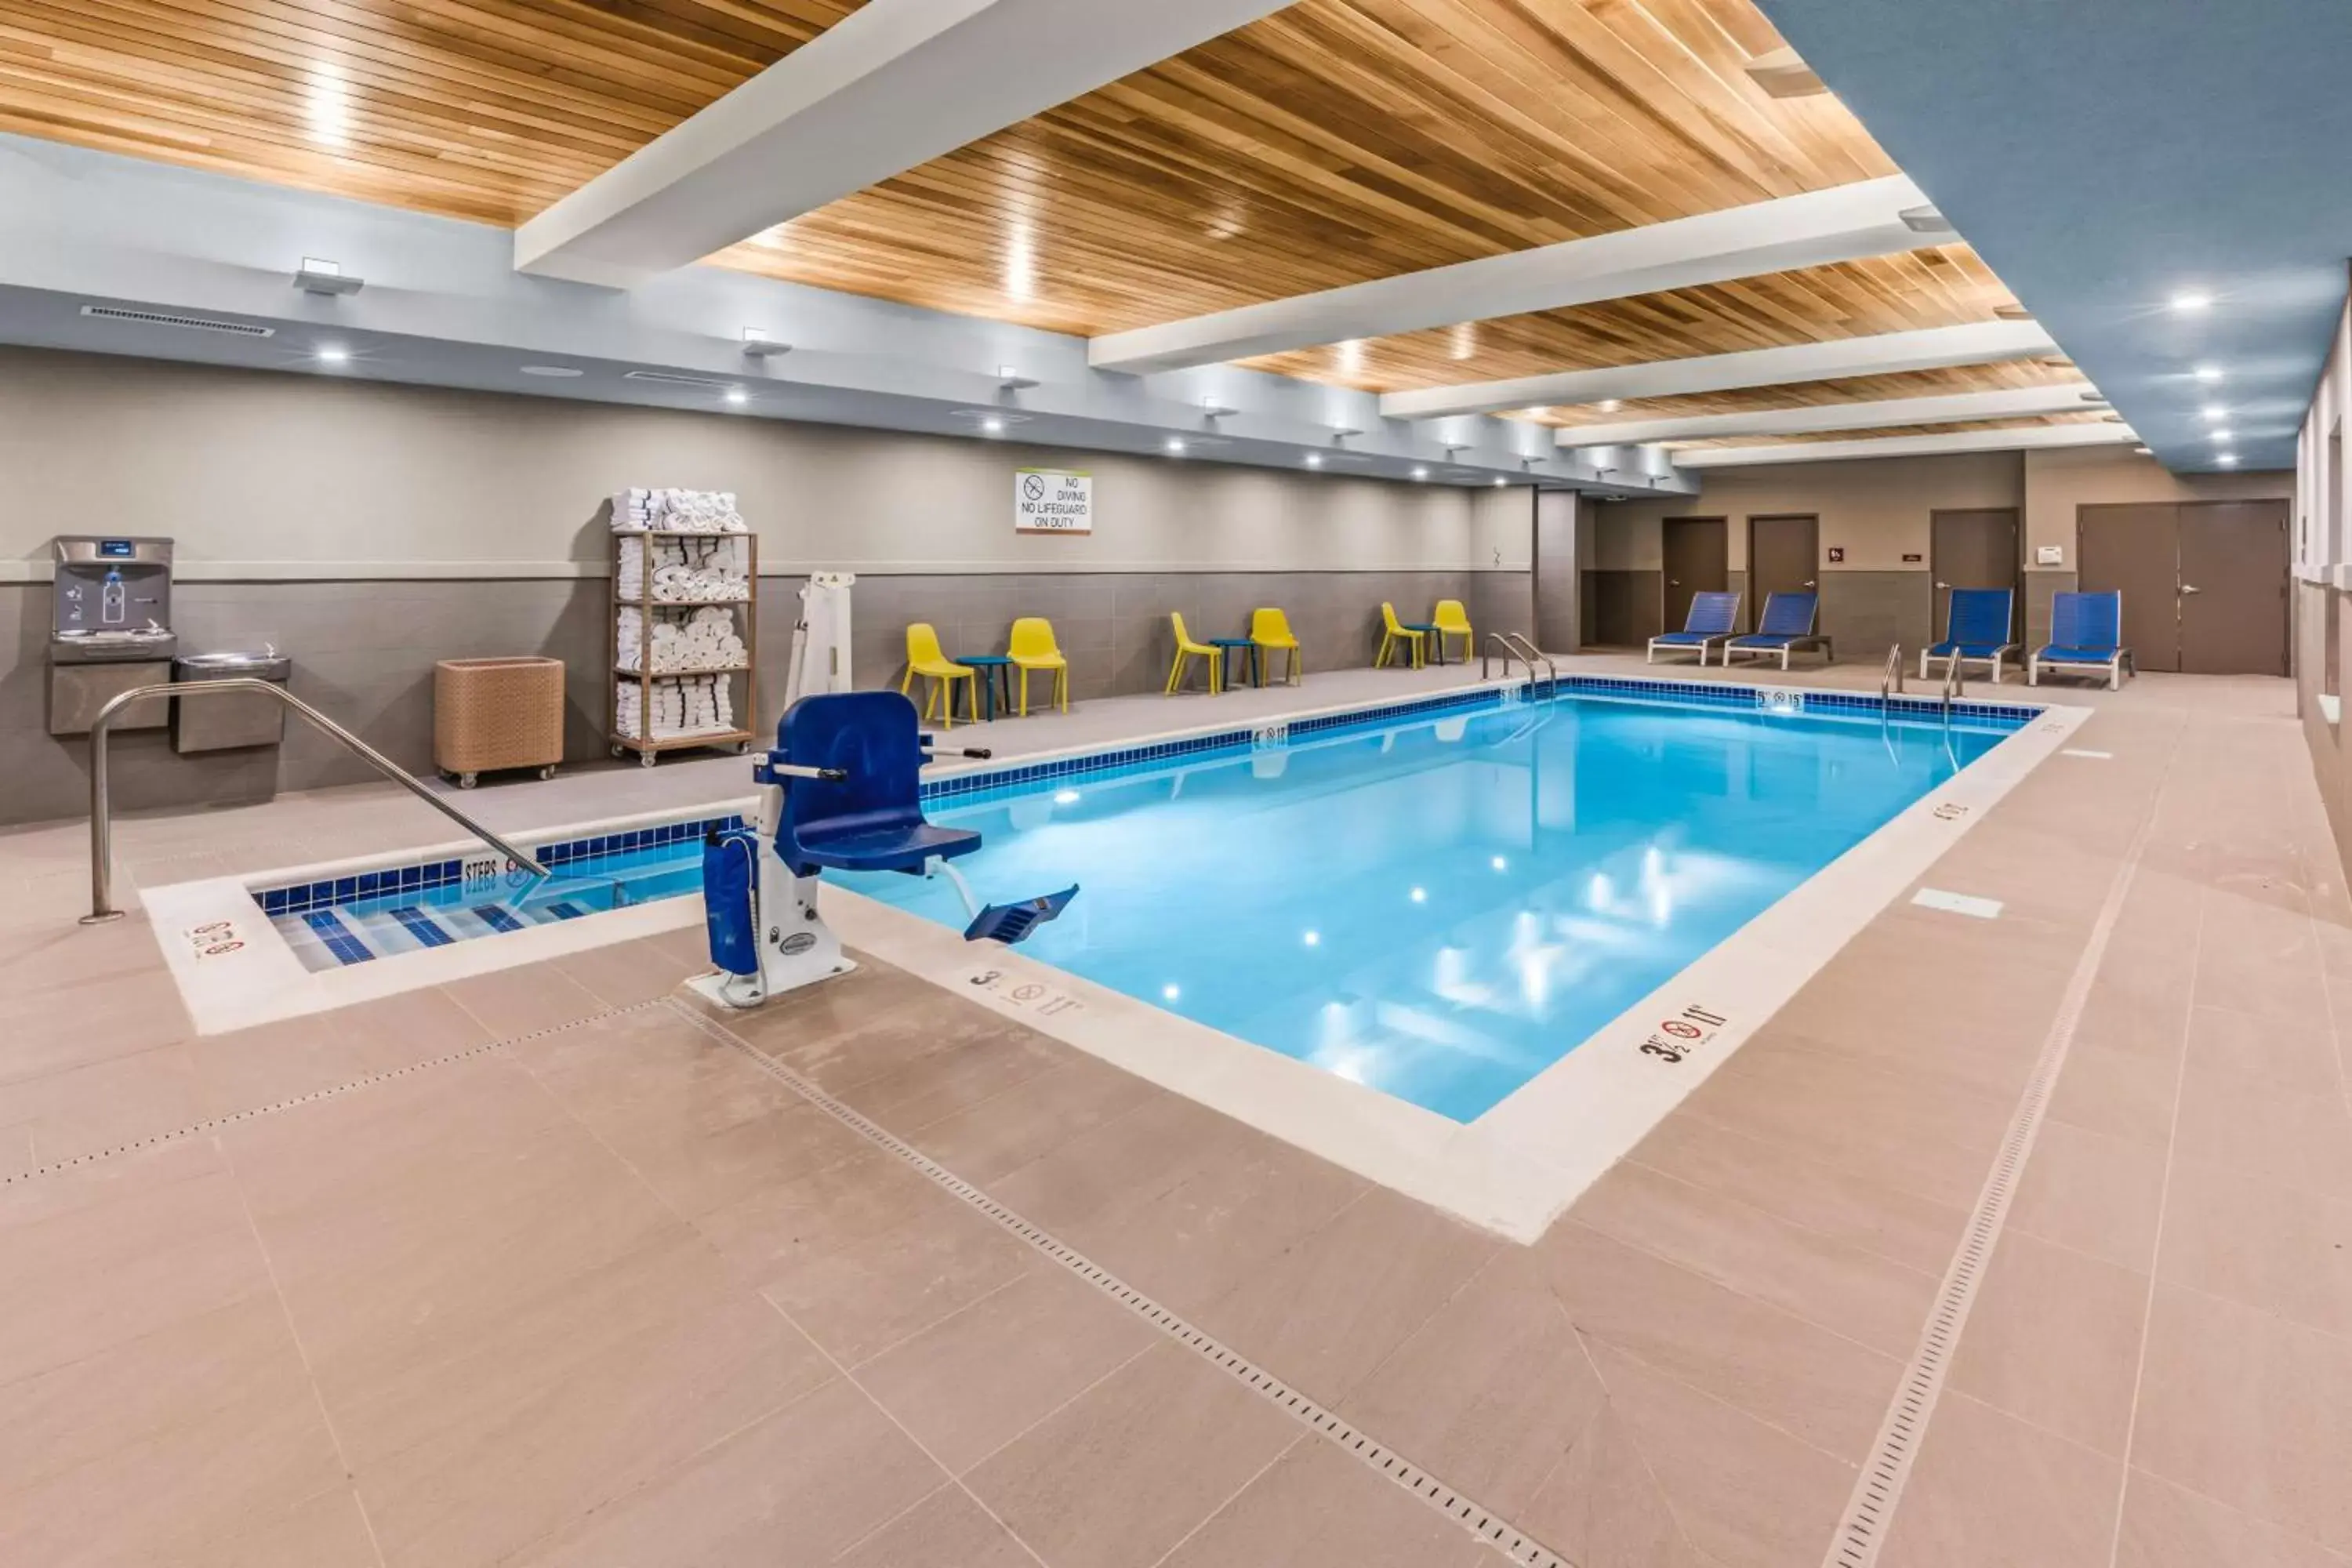 Swimming Pool in Home2 Suites By Hilton North Conway, NH